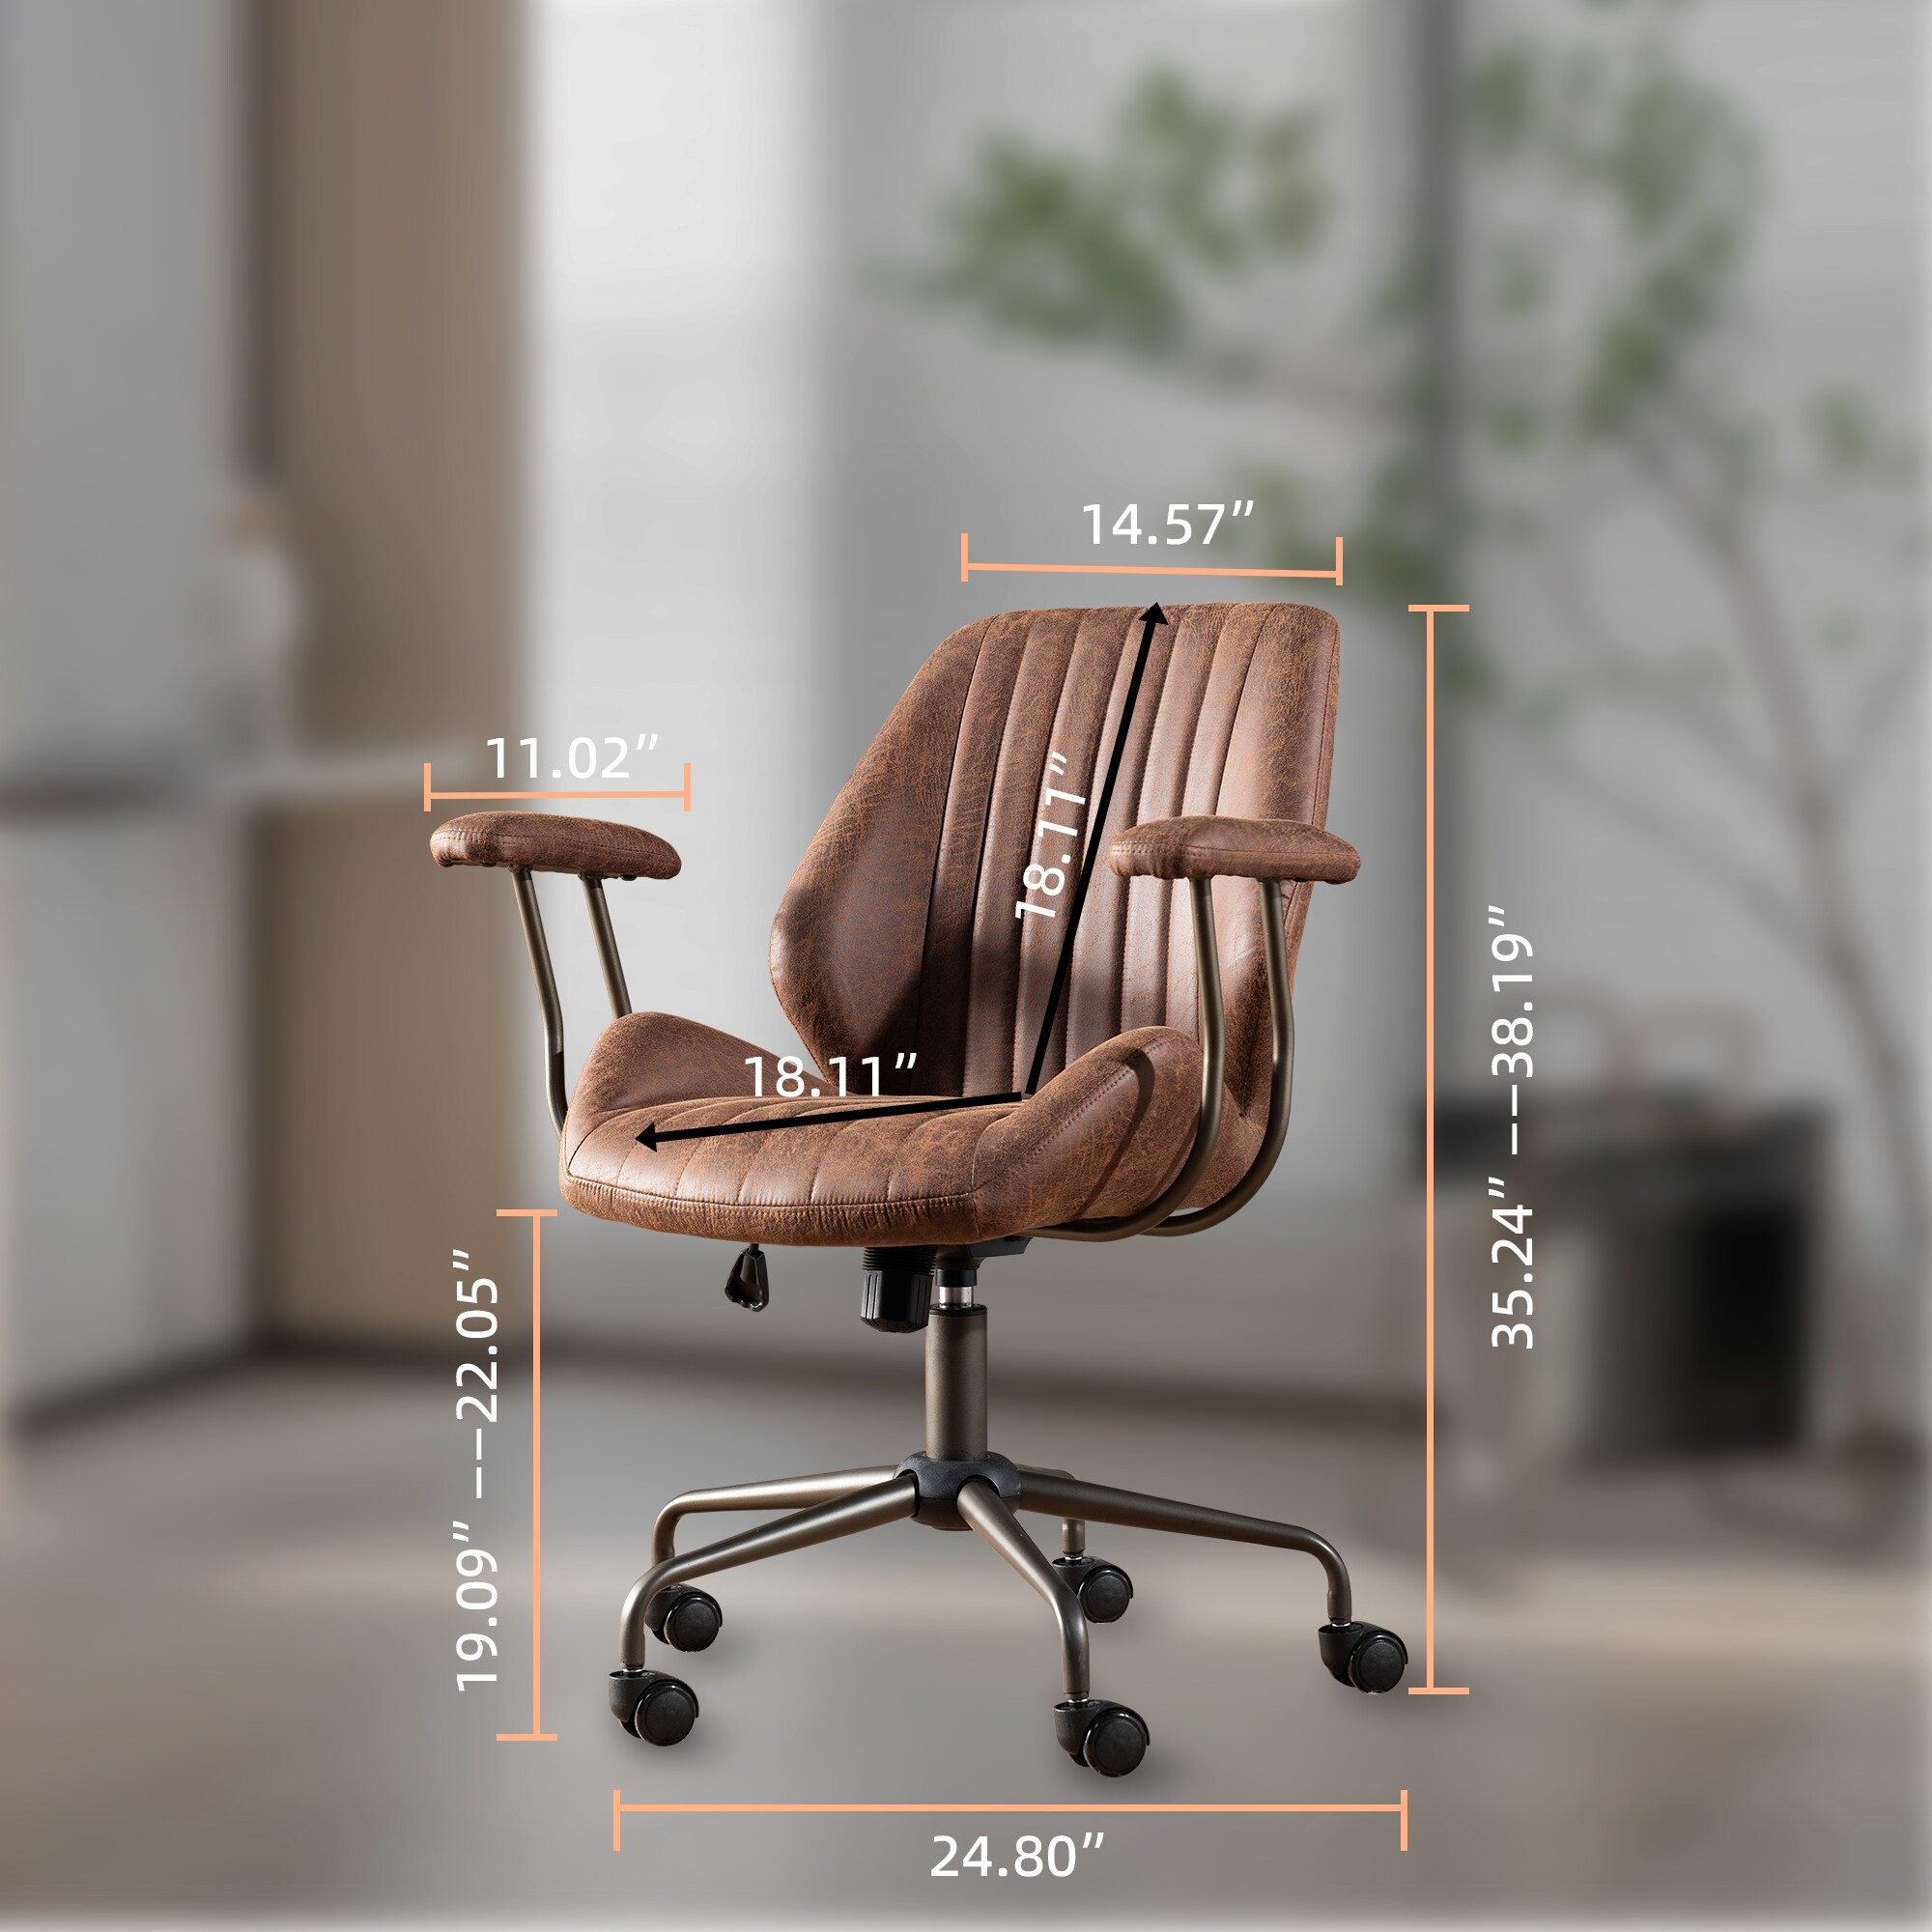 https://ak1.ostkcdn.com/images/products/is/images/direct/e7d375216b860d0979383a30574baed219b9089e/Ovios-Ergonomic-Classic-Suede-Office-Chair-Desk-Chair.jpg